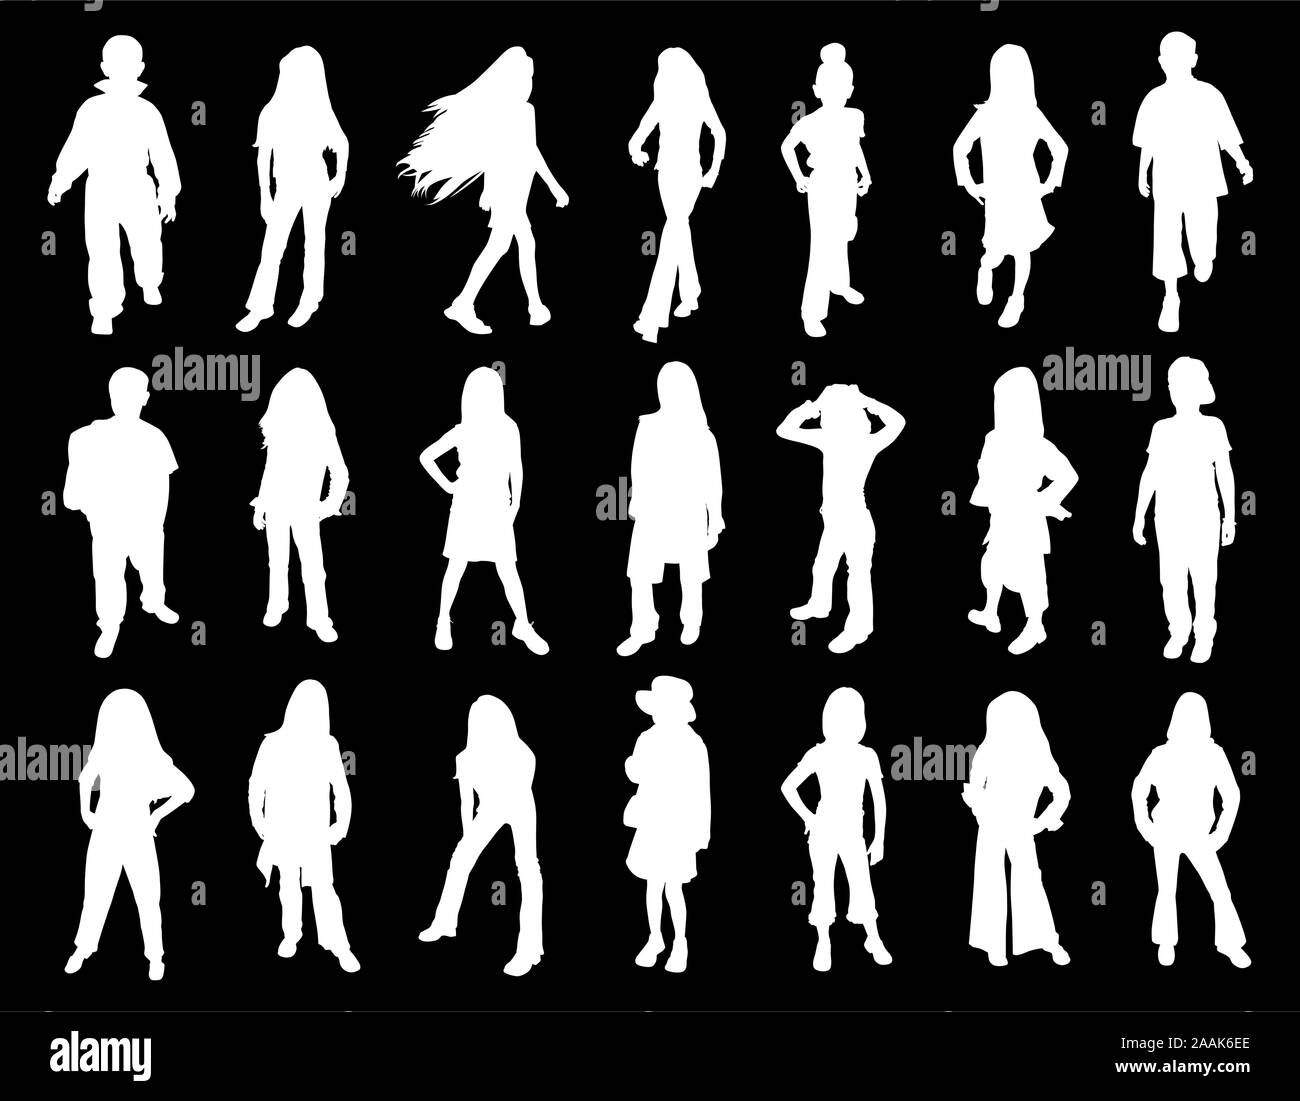 Twenty one kids models at fashion show. White silhouettes on black background. Stock Vector